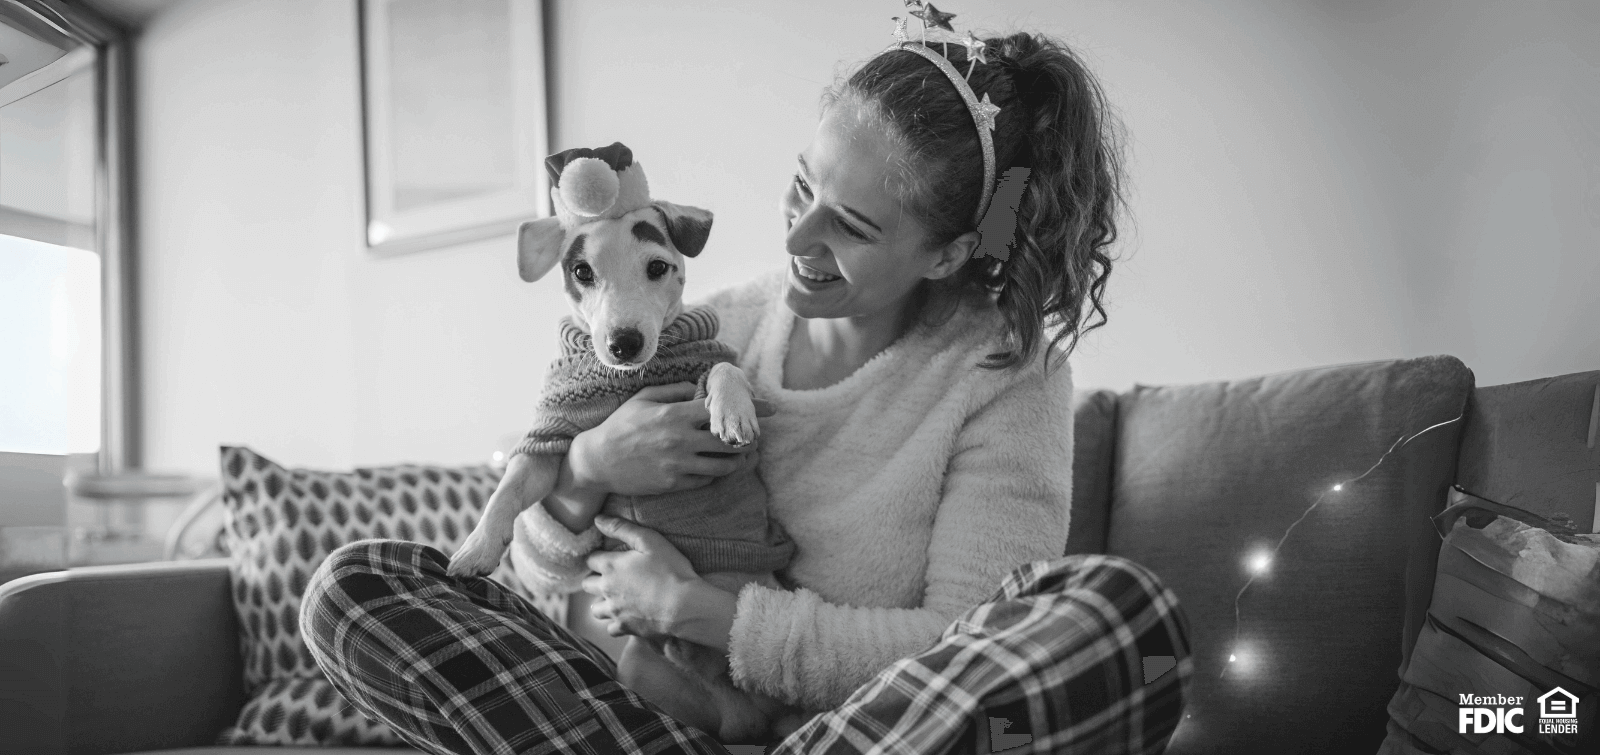 A young woman hugs her dog wearing holiday clothes and pajamas